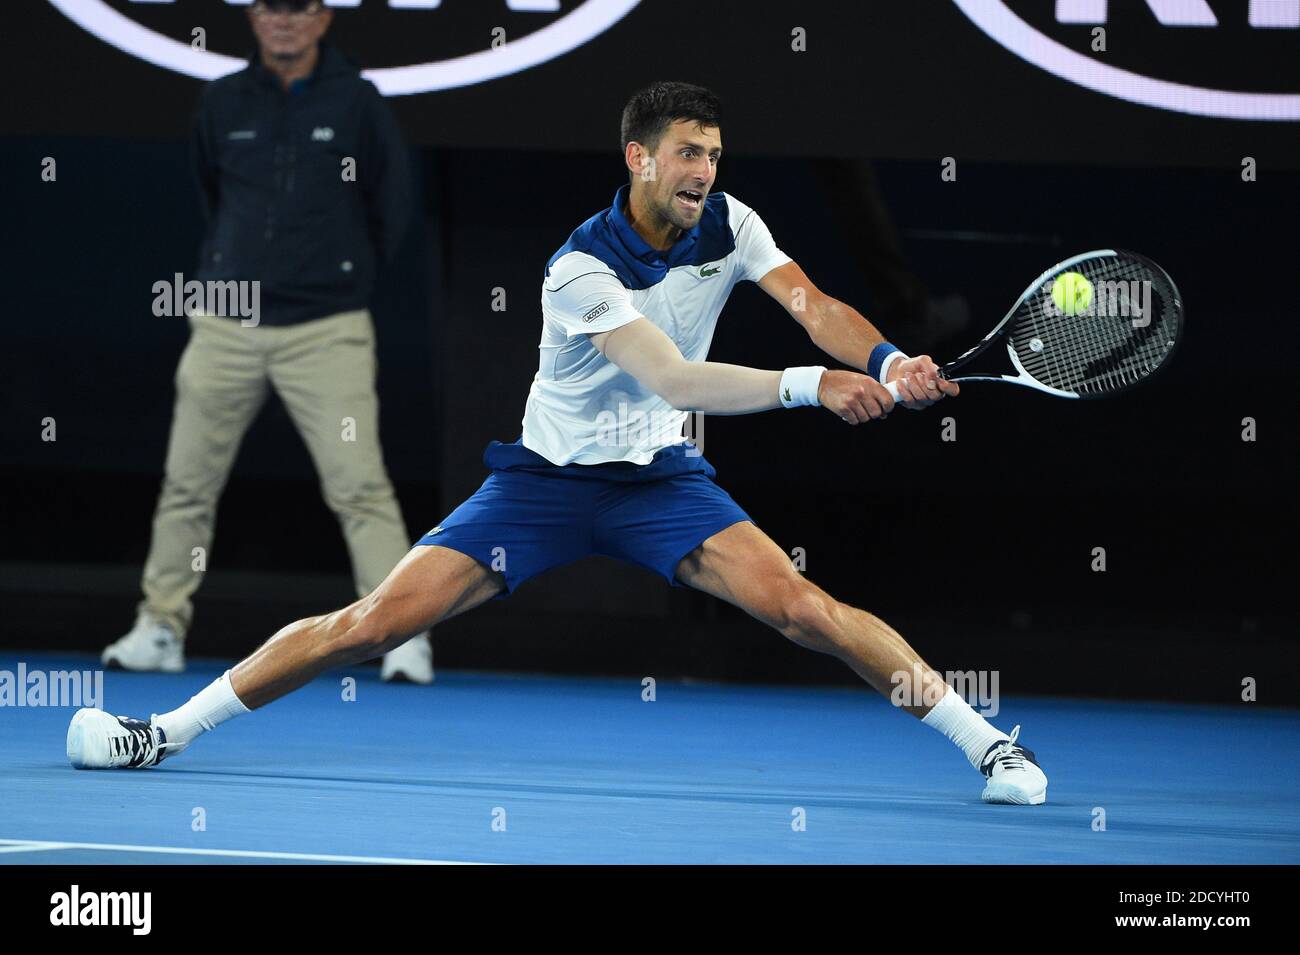 Novak Djokovic (SRB) during his fourth round match at the 2018 Australian Open at Melbourne Park in Melbourne, Australia, on January 22, 2018. Photo by Corinne Photo Alamy